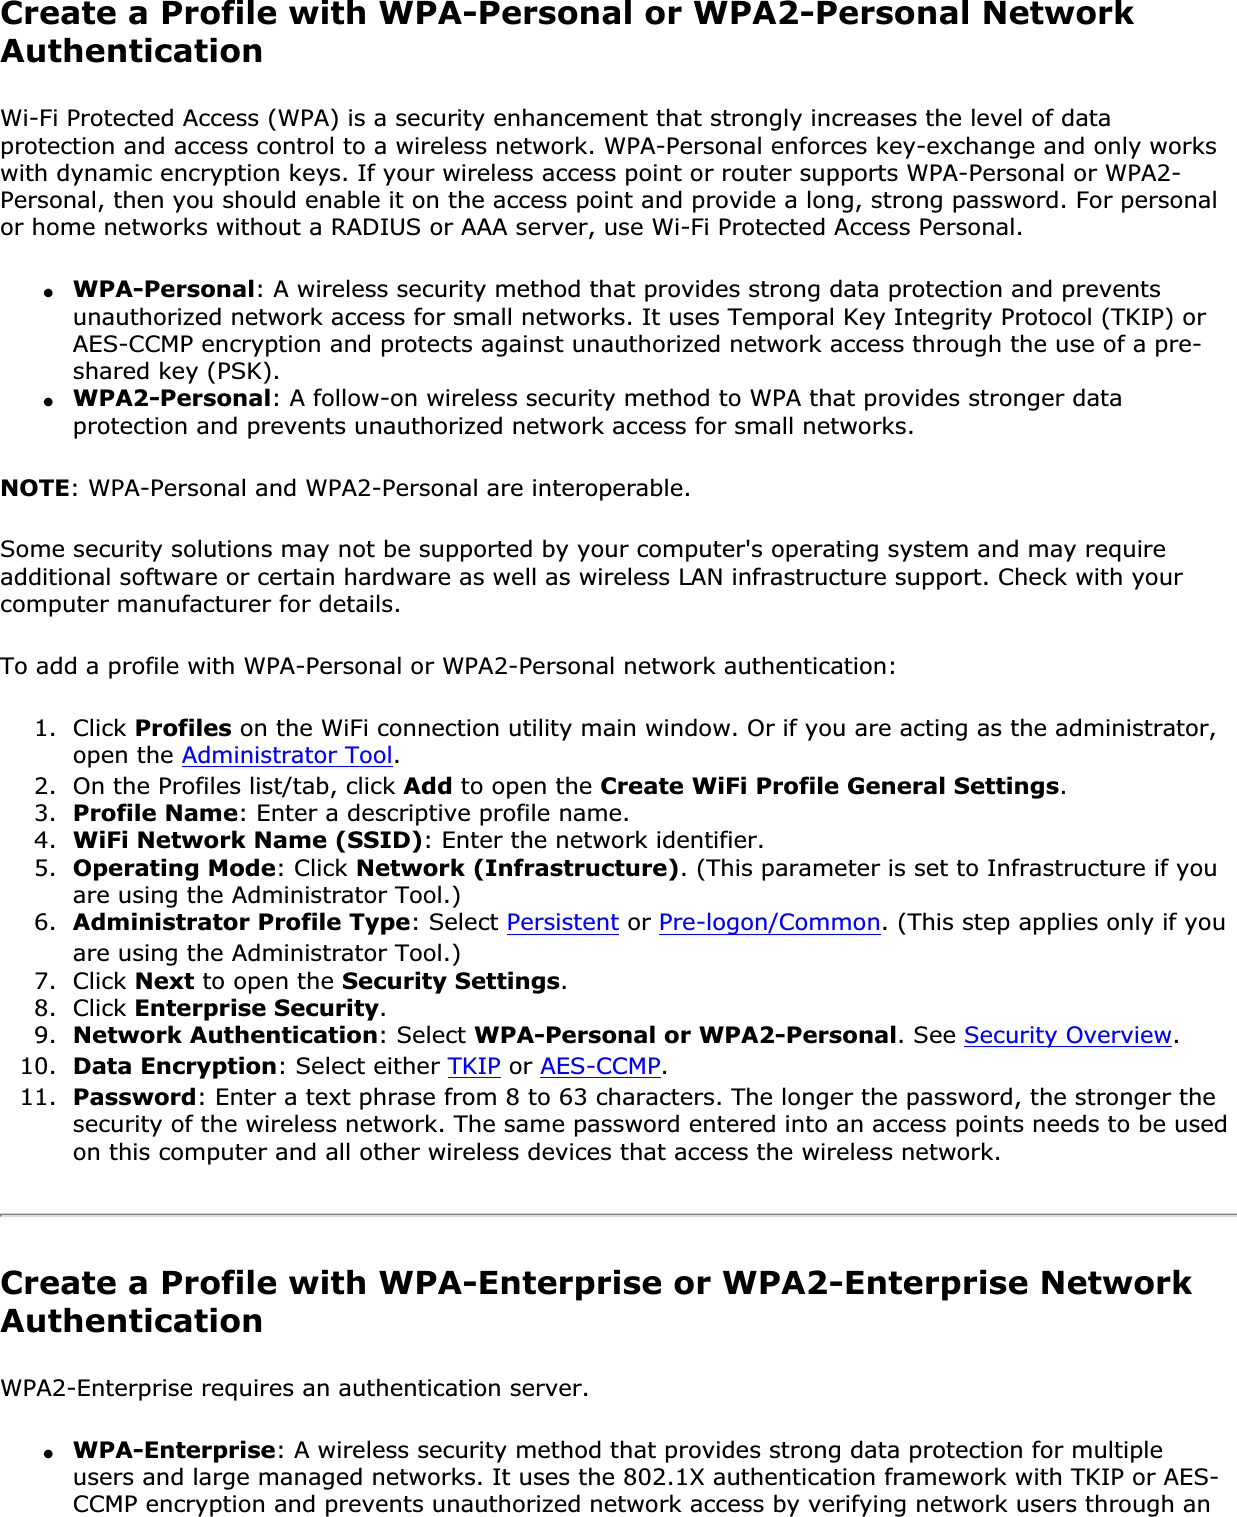 Create a Profile with WPA-Personal or WPA2-Personal Network AuthenticationWi-Fi Protected Access (WPA) is a security enhancement that strongly increases the level of data protection and access control to a wireless network. WPA-Personal enforces key-exchange and only works with dynamic encryption keys. If your wireless access point or router supports WPA-Personal or WPA2-Personal, then you should enable it on the access point and provide a long, strong password. For personal or home networks without a RADIUS or AAA server, use Wi-Fi Protected Access Personal.●WPA-Personal: A wireless security method that provides strong data protection and prevents unauthorized network access for small networks. It uses Temporal Key Integrity Protocol (TKIP) or AES-CCMP encryption and protects against unauthorized network access through the use of a pre-shared key (PSK).●WPA2-Personal: A follow-on wireless security method to WPA that provides stronger data protection and prevents unauthorized network access for small networks.NOTE: WPA-Personal and WPA2-Personal are interoperable.Some security solutions may not be supported by your computer&apos;s operating system and may require additional software or certain hardware as well as wireless LAN infrastructure support. Check with your computer manufacturer for details.To add a profile with WPA-Personal or WPA2-Personal network authentication: 1. Click Profiles on the WiFi connection utility main window. Or if you are acting as the administrator, open the Administrator Tool.2. On the Profiles list/tab, click Add to open the Create WiFi Profile General Settings.3. Profile Name: Enter a descriptive profile name.4. WiFi Network Name (SSID): Enter the network identifier.5. Operating Mode: Click Network (Infrastructure). (This parameter is set to Infrastructure if you are using the Administrator Tool.)6. Administrator Profile Type: Select Persistent or Pre-logon/Common. (This step applies only if you are using the Administrator Tool.)7. Click Next to open the Security Settings.8. Click Enterprise Security.9. Network Authentication: Select WPA-Personal or WPA2-Personal. See Security Overview.10. Data Encryption: Select either TKIP or AES-CCMP.11. Password: Enter a text phrase from 8 to 63 characters. The longer the password, the stronger the security of the wireless network. The same password entered into an access points needs to be used on this computer and all other wireless devices that access the wireless network.Create a Profile with WPA-Enterprise or WPA2-Enterprise Network AuthenticationWPA2-Enterprise requires an authentication server.●WPA-Enterprise: A wireless security method that provides strong data protection for multiple users and large managed networks. It uses the 802.1X authentication framework with TKIP or AES-CCMP encryption and prevents unauthorized network access by verifying network users through an 